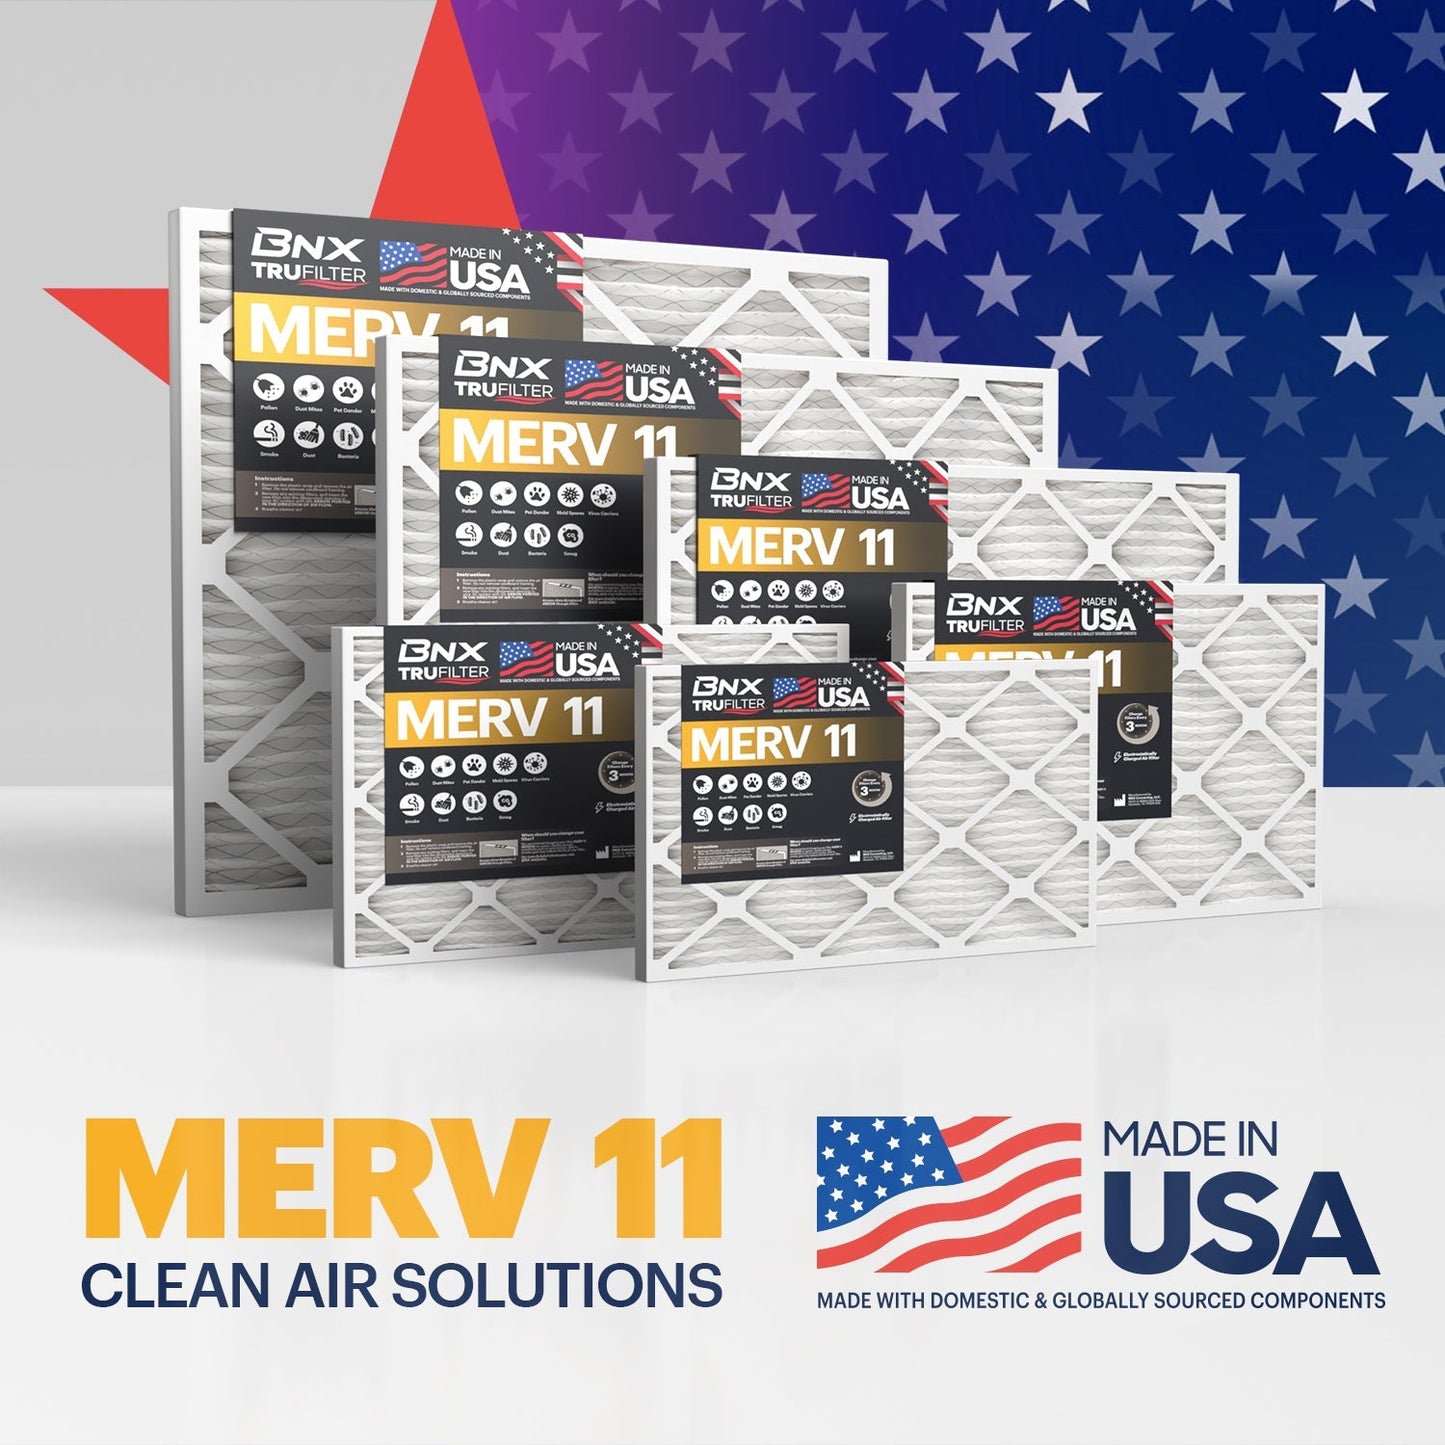 BNX TruFilter 16x20x1 Air Filter MERV 11 (12-Pack) - MADE IN USA - Allergen Defense Electrostatic Pleated Air Conditioner HVAC AC Furnace Filters for Allergies, Dust, Pet, Smoke, Allergy MPR 1200 FPR 7